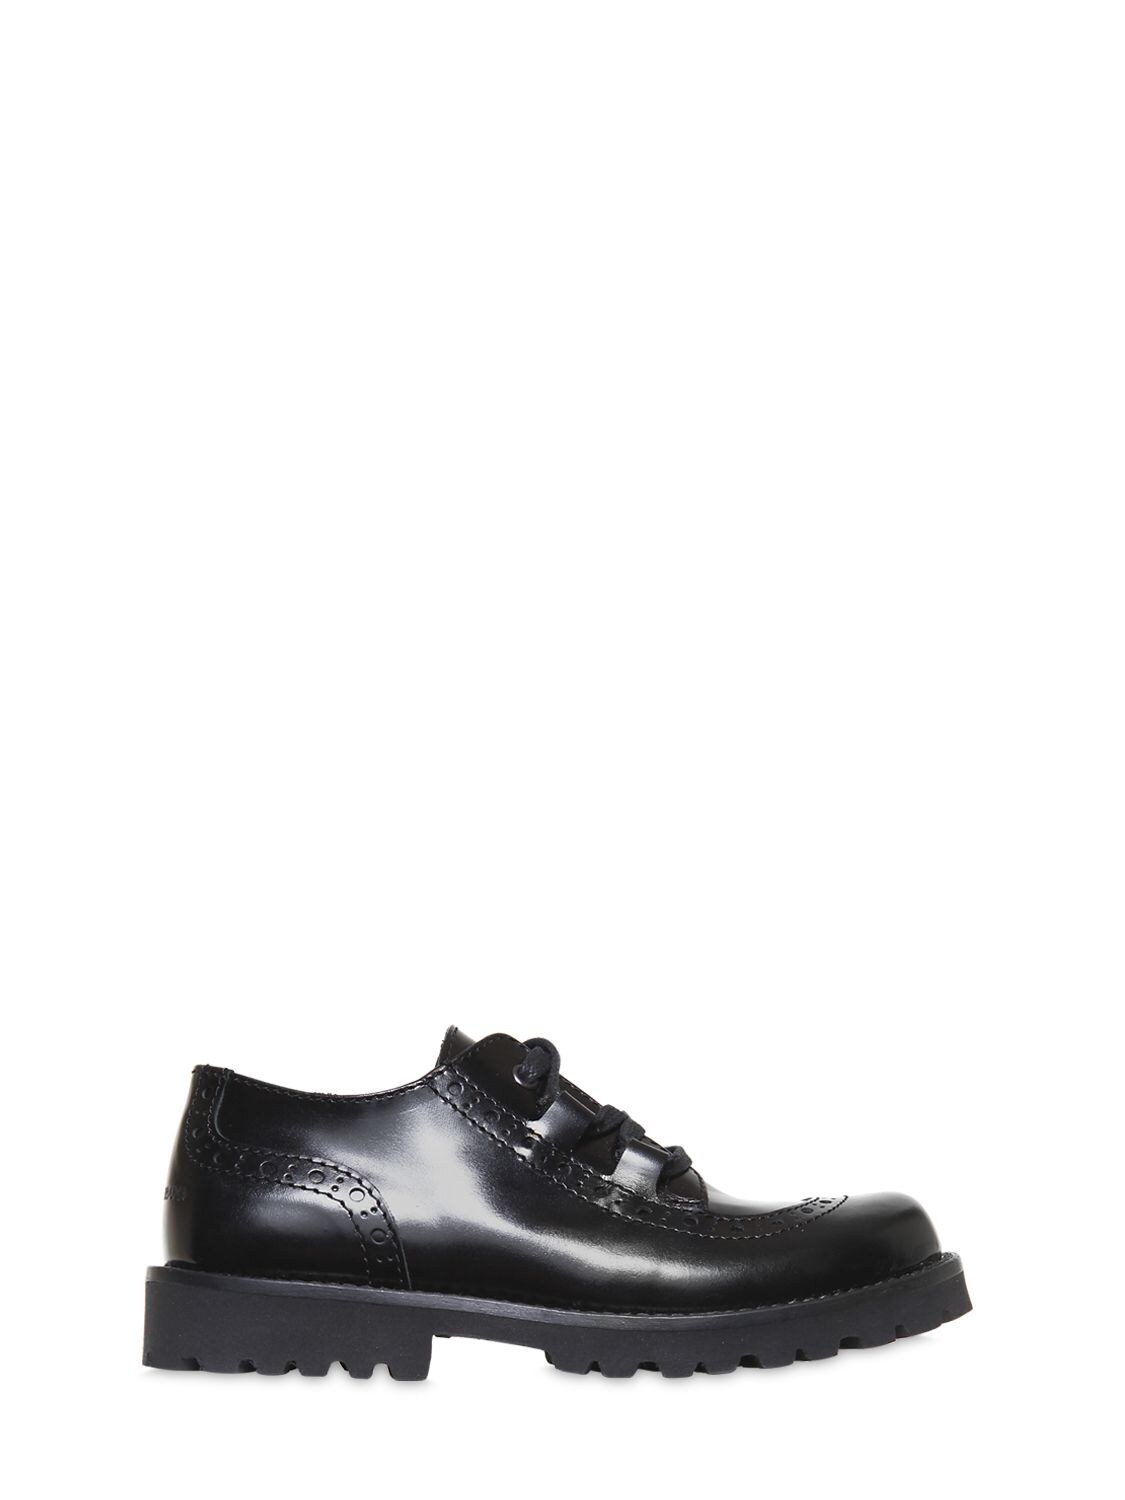 DOLCE & GABBANA LEATHER DERBY LACE-UP SHOES,64I6T9005-TJAWMDA1